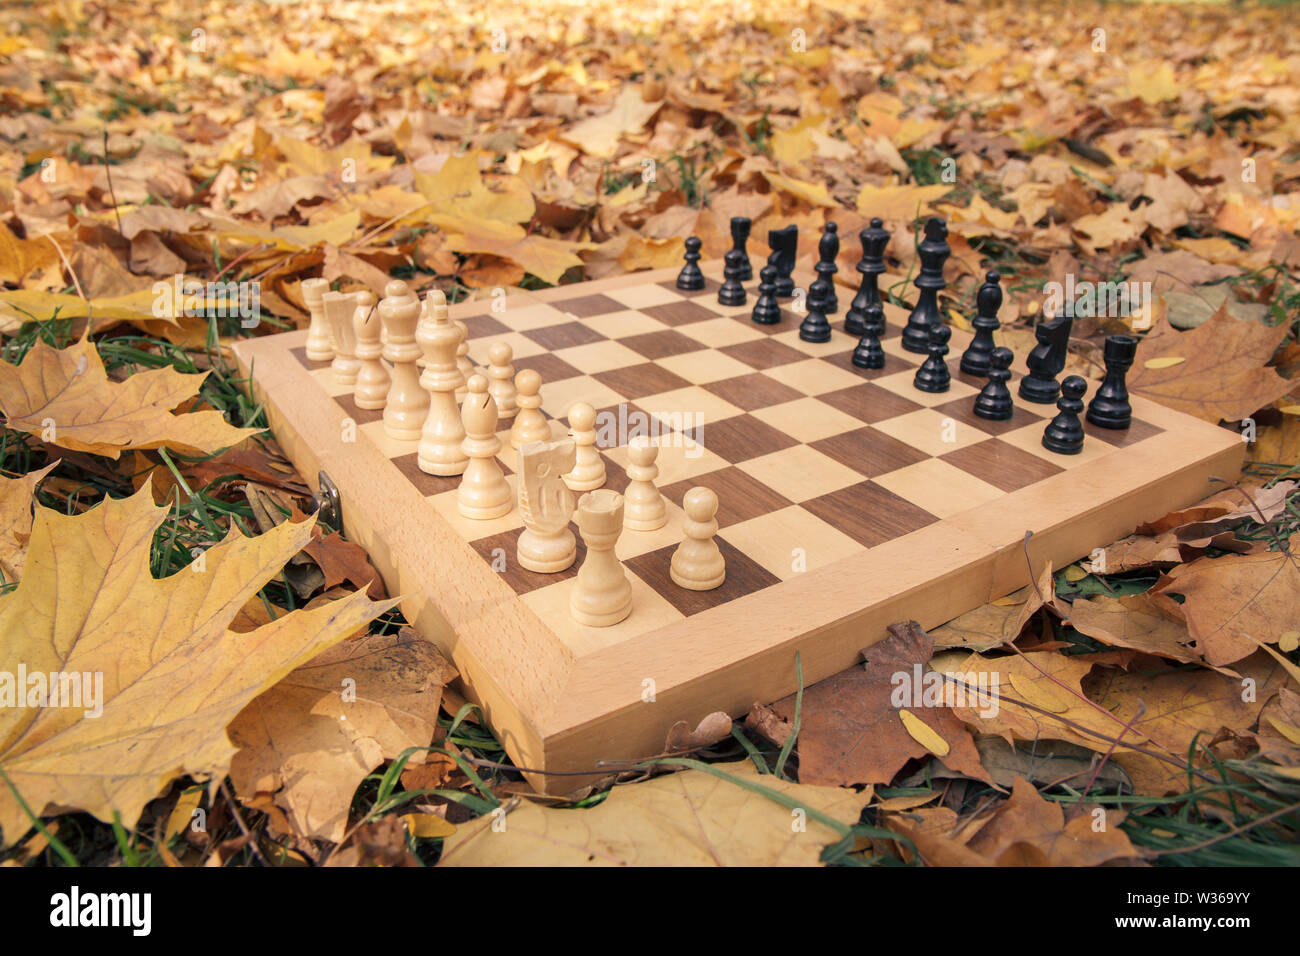 Close-up view of wooden chessboard and pieces on the ground covered with dry yellow leaves. Focus on white pieces. Stock Photo